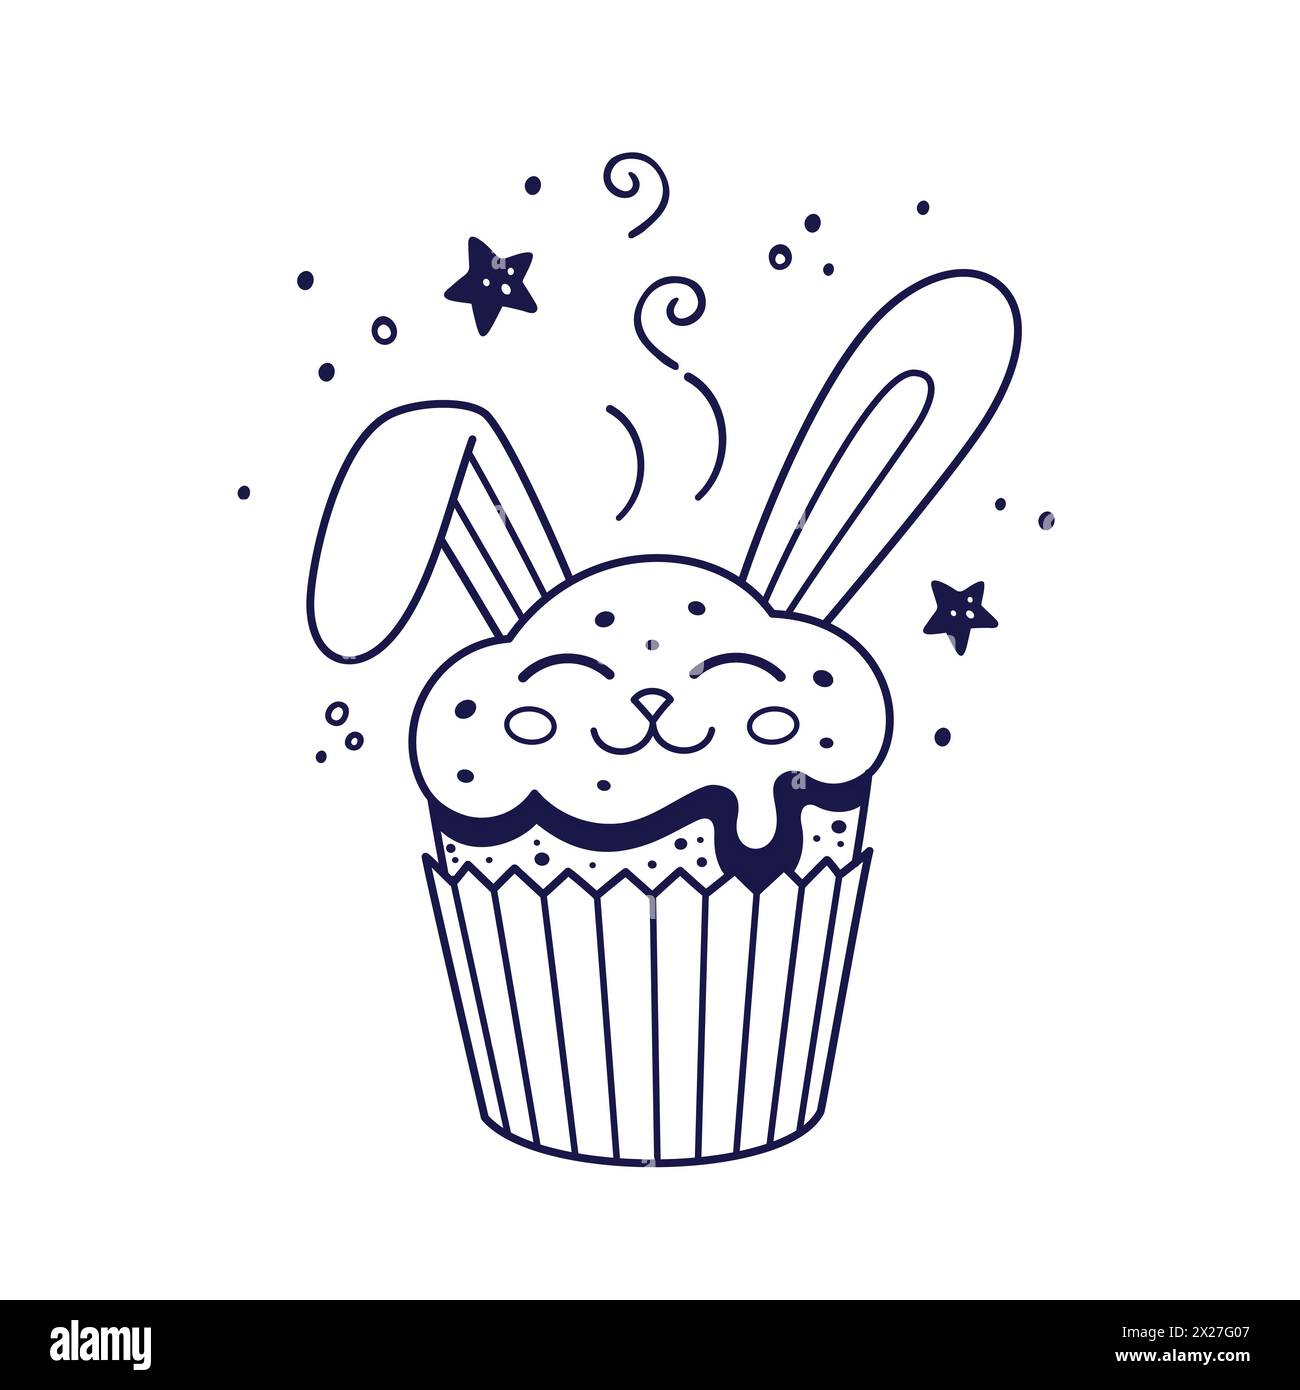 Easter cake with cream rabbit ear in cartoon style. Easter pastry with bunny ears. Doodle style. Hand drawn line art illustration isolated on white background. Kids Coloring book. Stock Vector